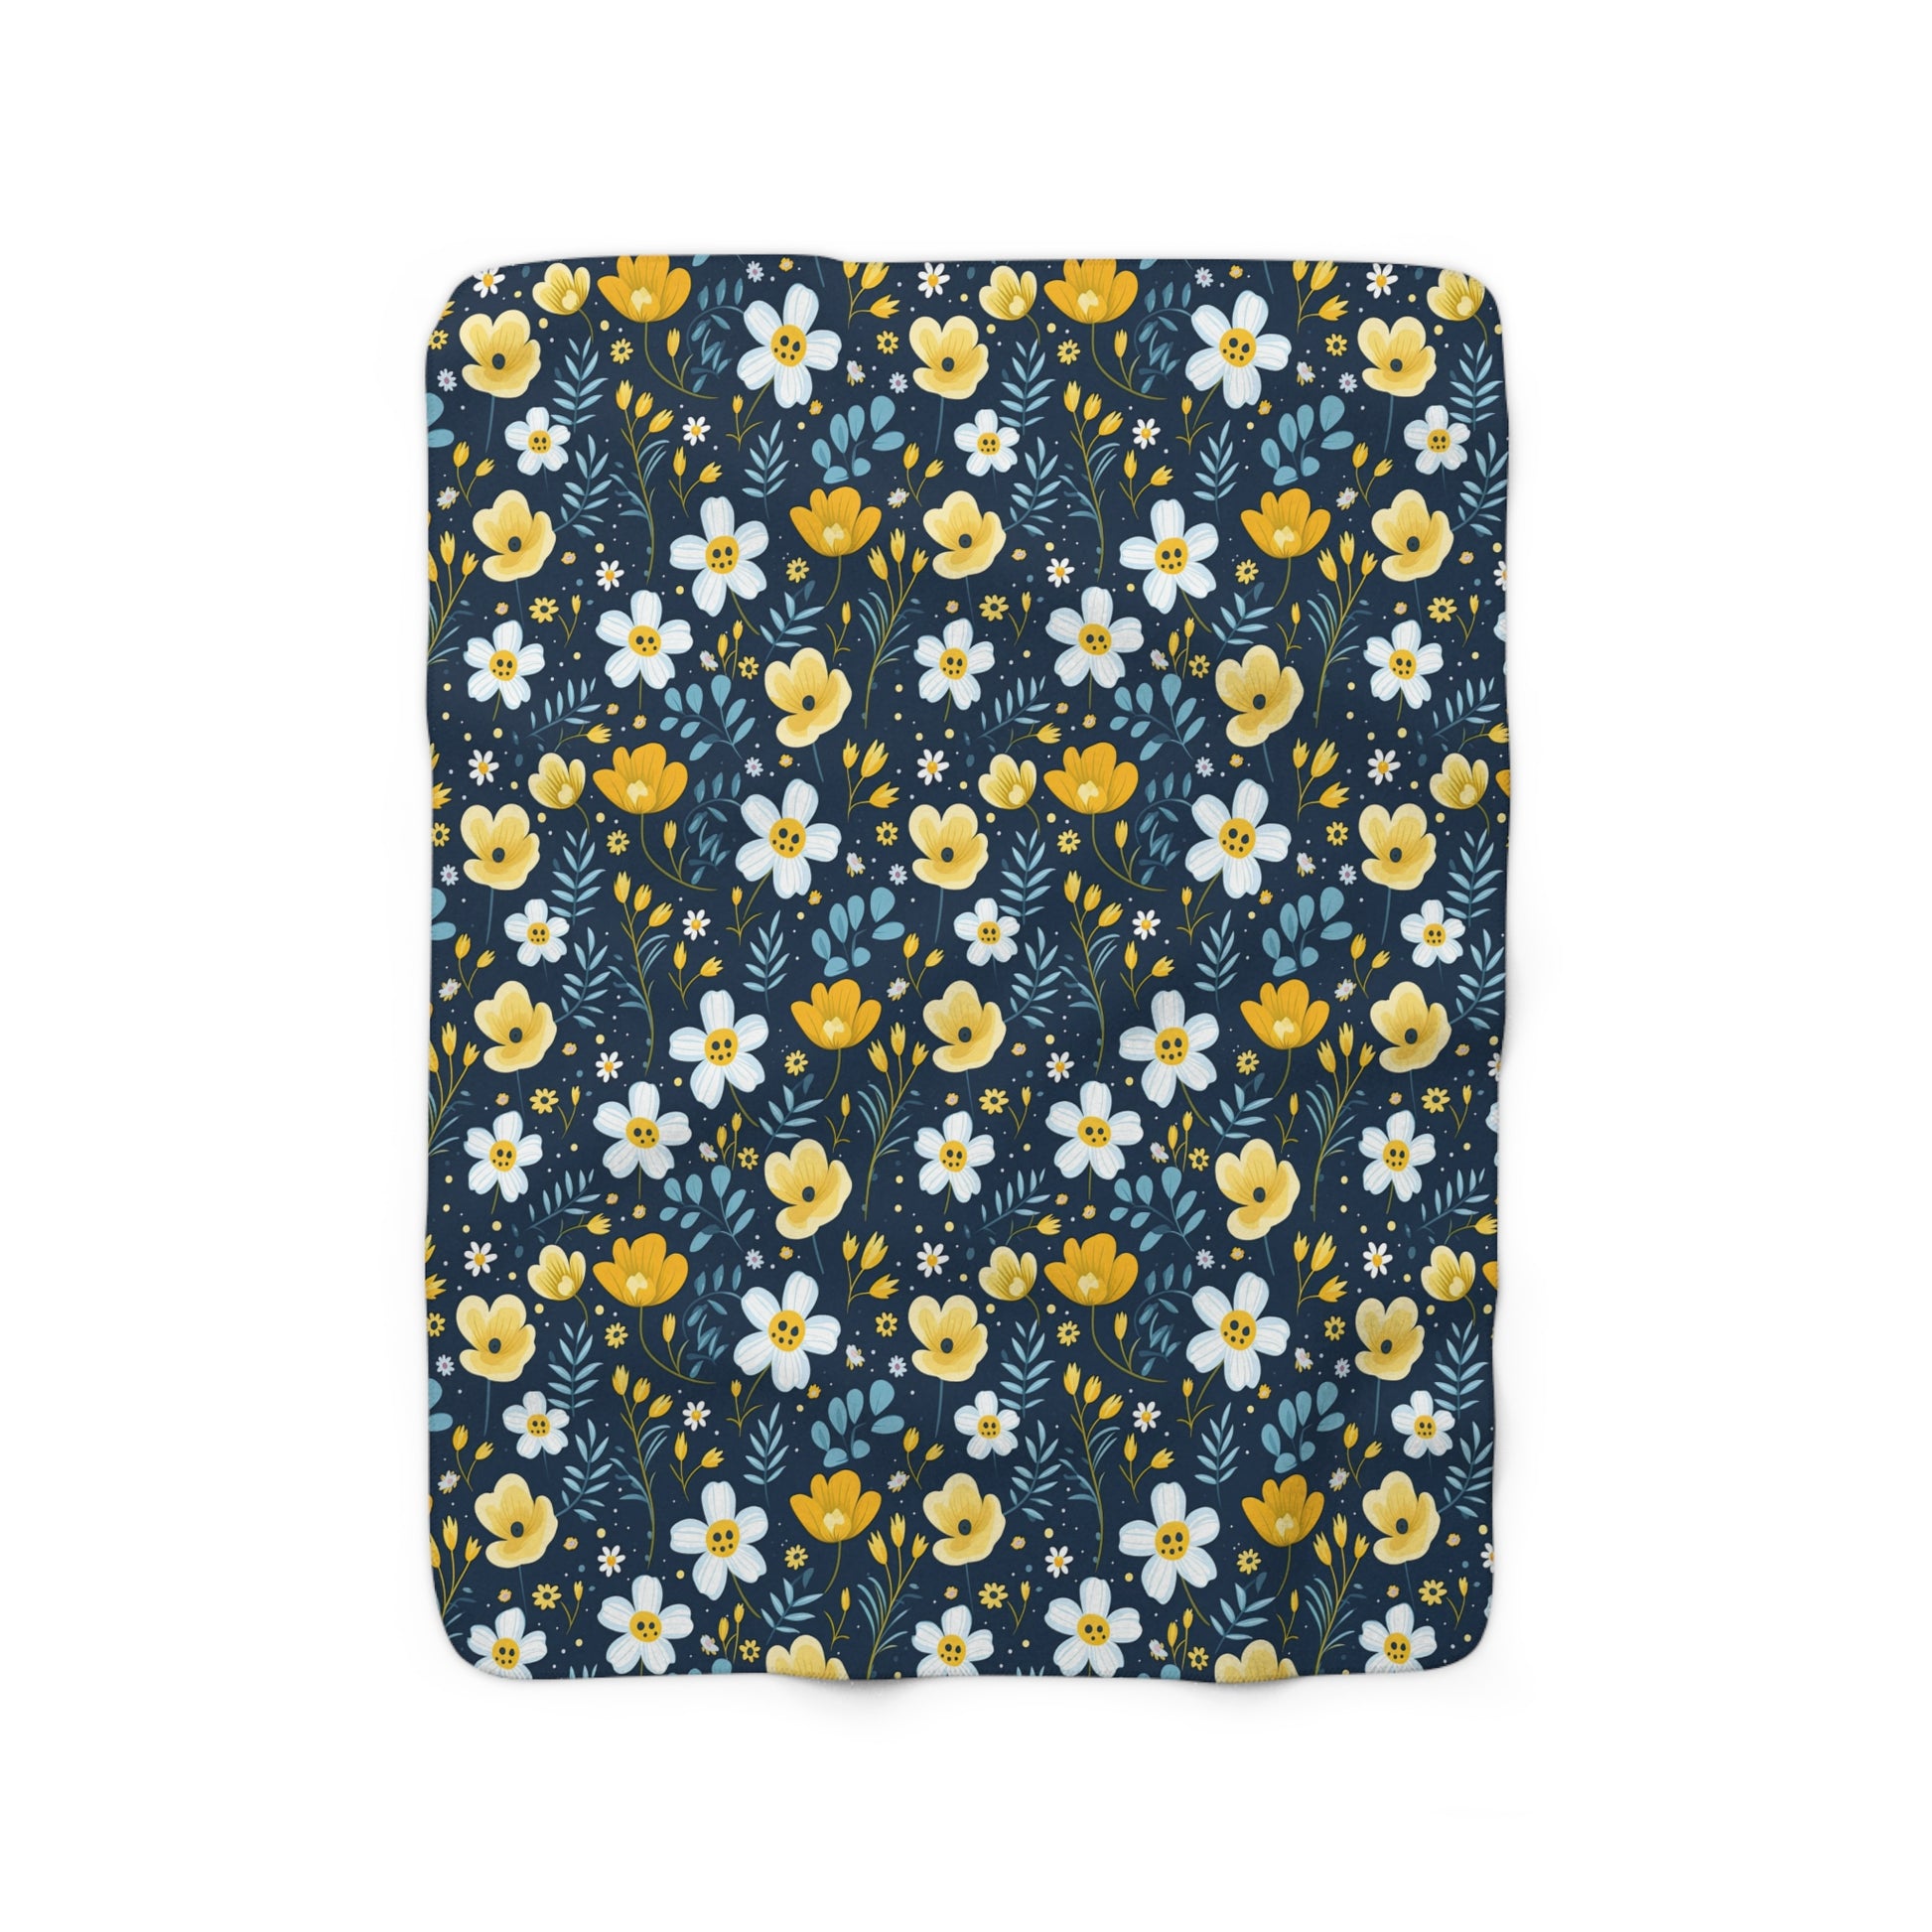 Dark Blue and Yellow Floral Sherpa Blanket - Watercolor Floral Sherpa